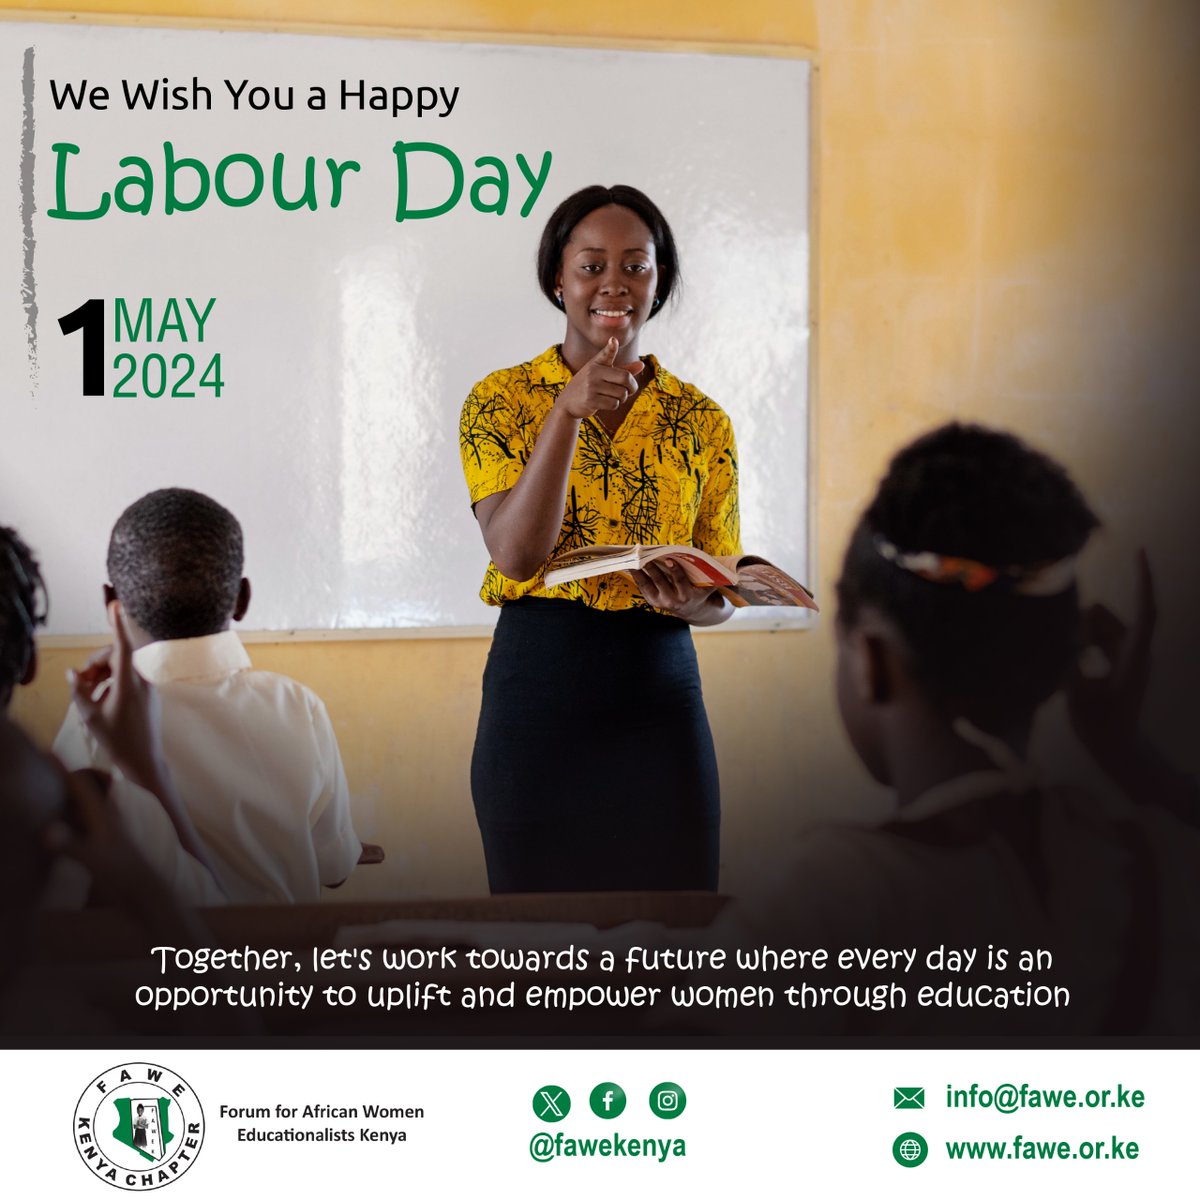 Happy #LabourDay! As we honor the hard work of every worker today, let's also strive for a future where gender parity and educational equality are not aspirations, but realities. Join us in committing to a just and inclusive society for all. #GenderEquality #InclusiveEducation